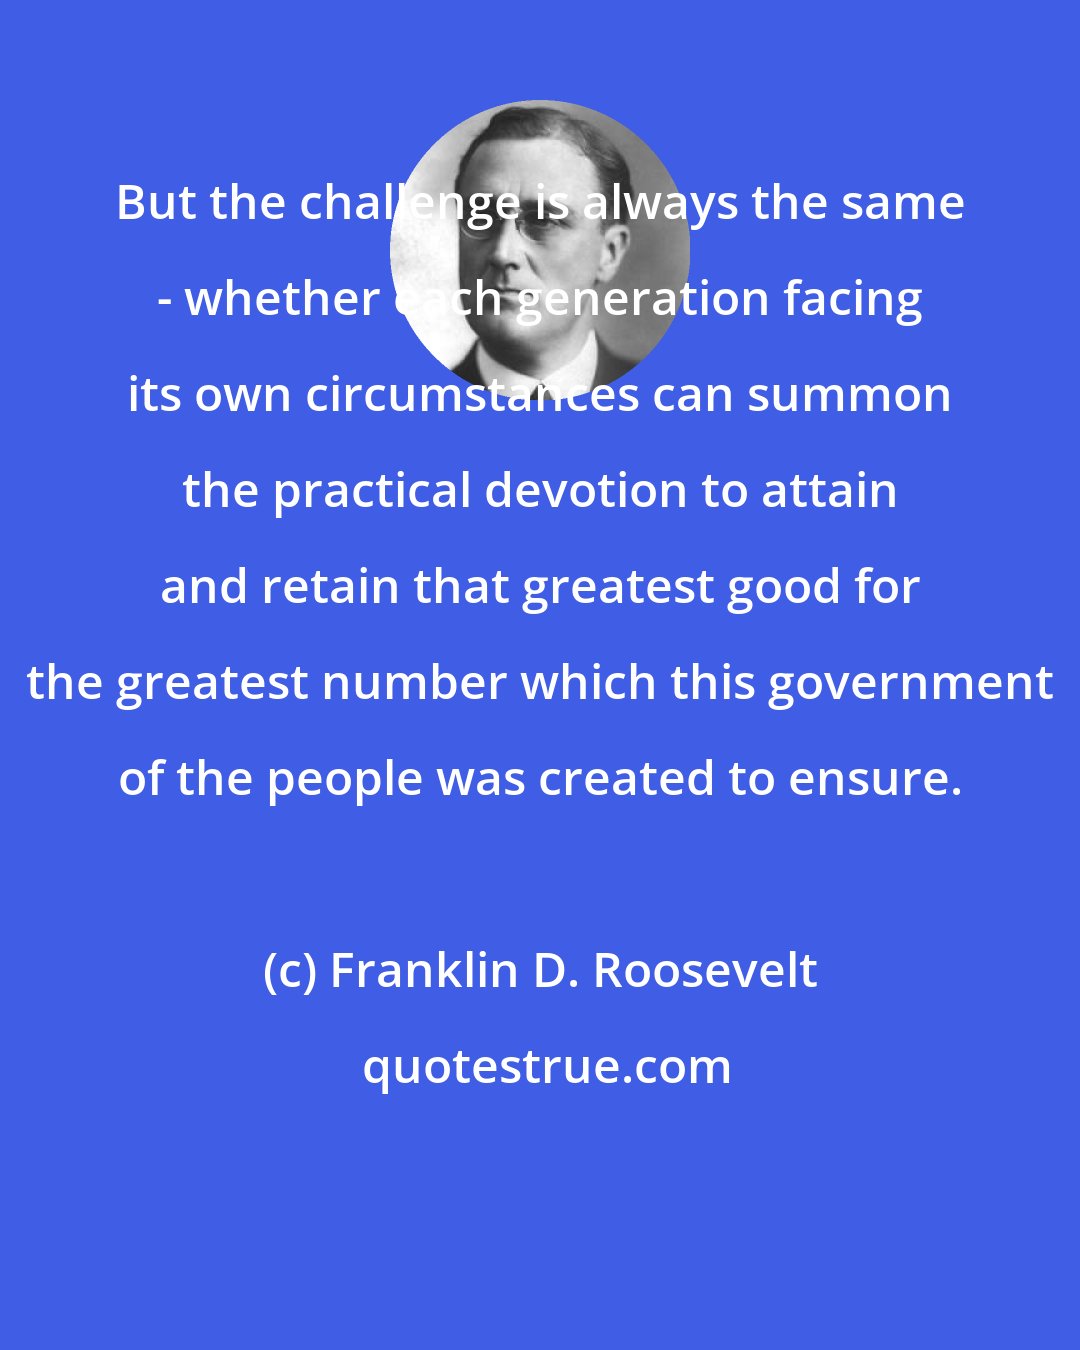 Franklin D. Roosevelt: But the challenge is always the same - whether each generation facing its own circumstances can summon the practical devotion to attain and retain that greatest good for the greatest number which this government of the people was created to ensure.